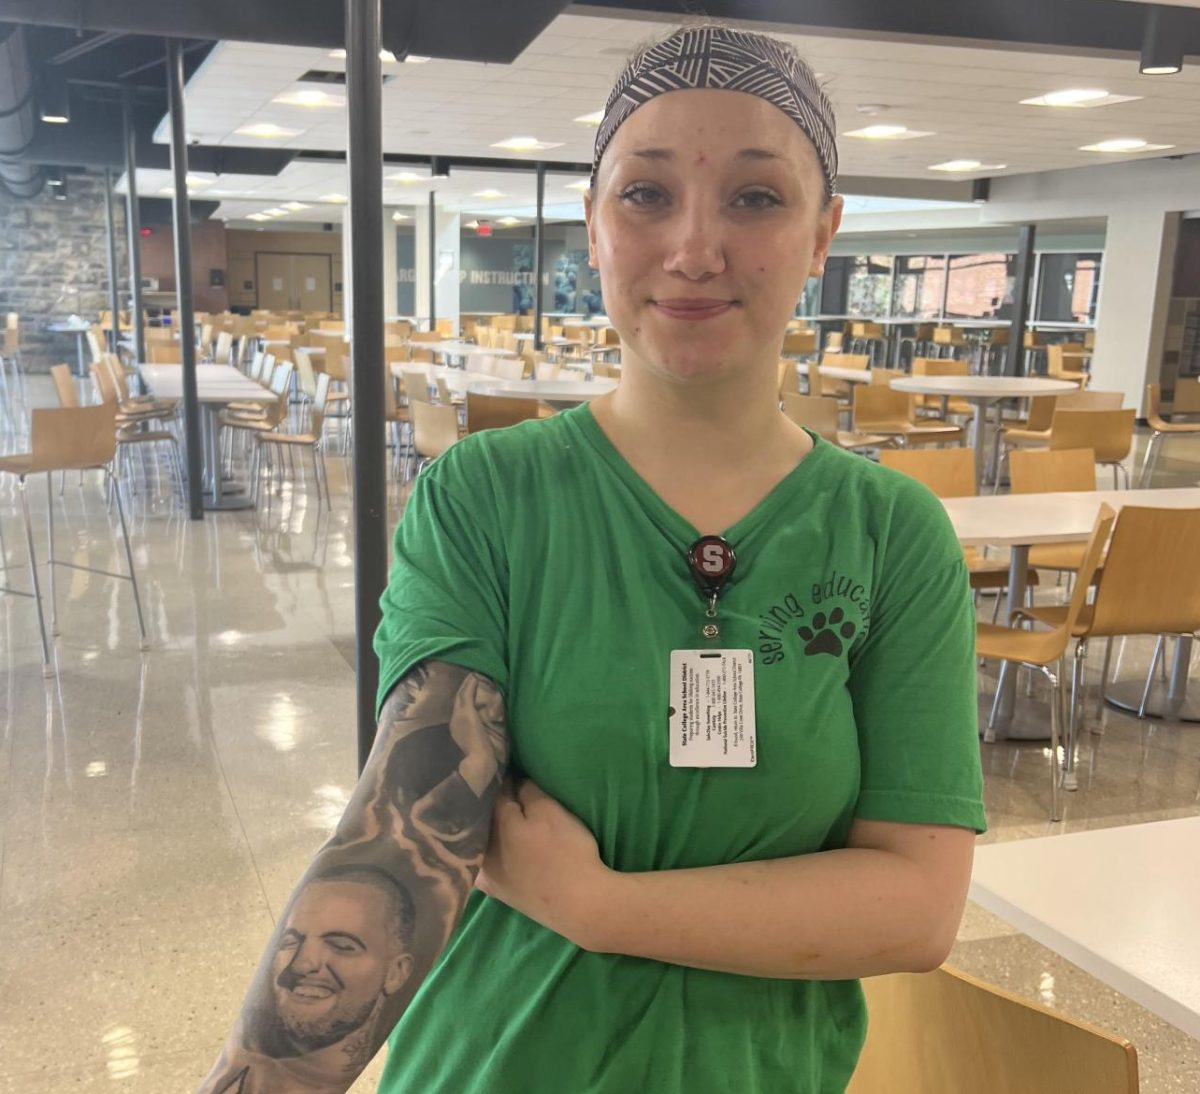 Kaylana Hoffman shows off her tattoo of Mac Miller that she got following his death. Sept. 7 was the five year anniversary of Miller’s death from an accidental overdose. 